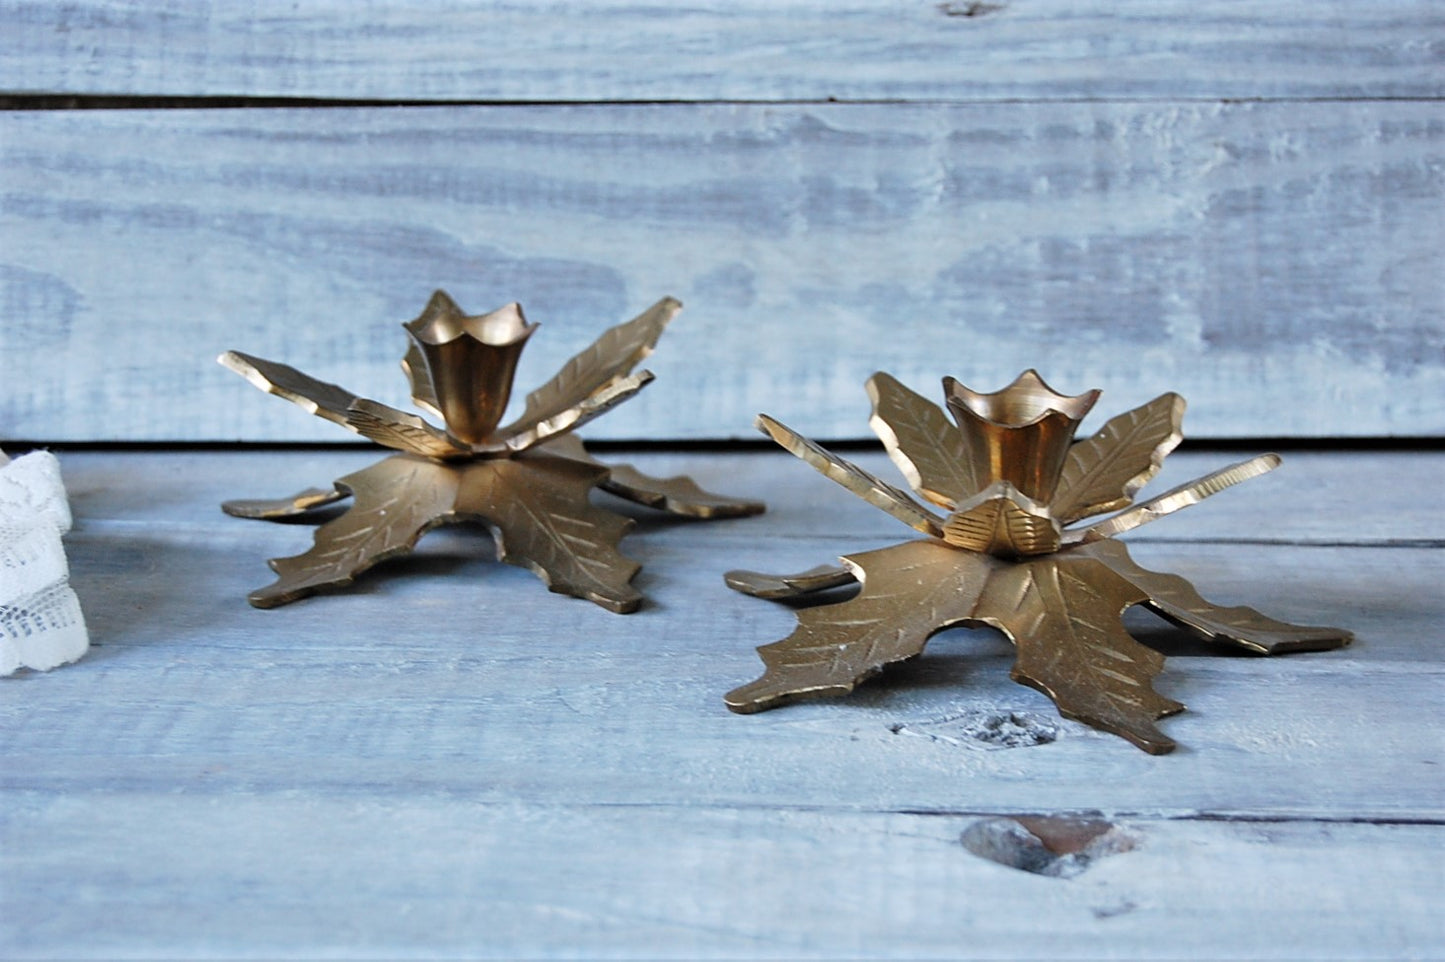 Brass Poinsettia candle holders